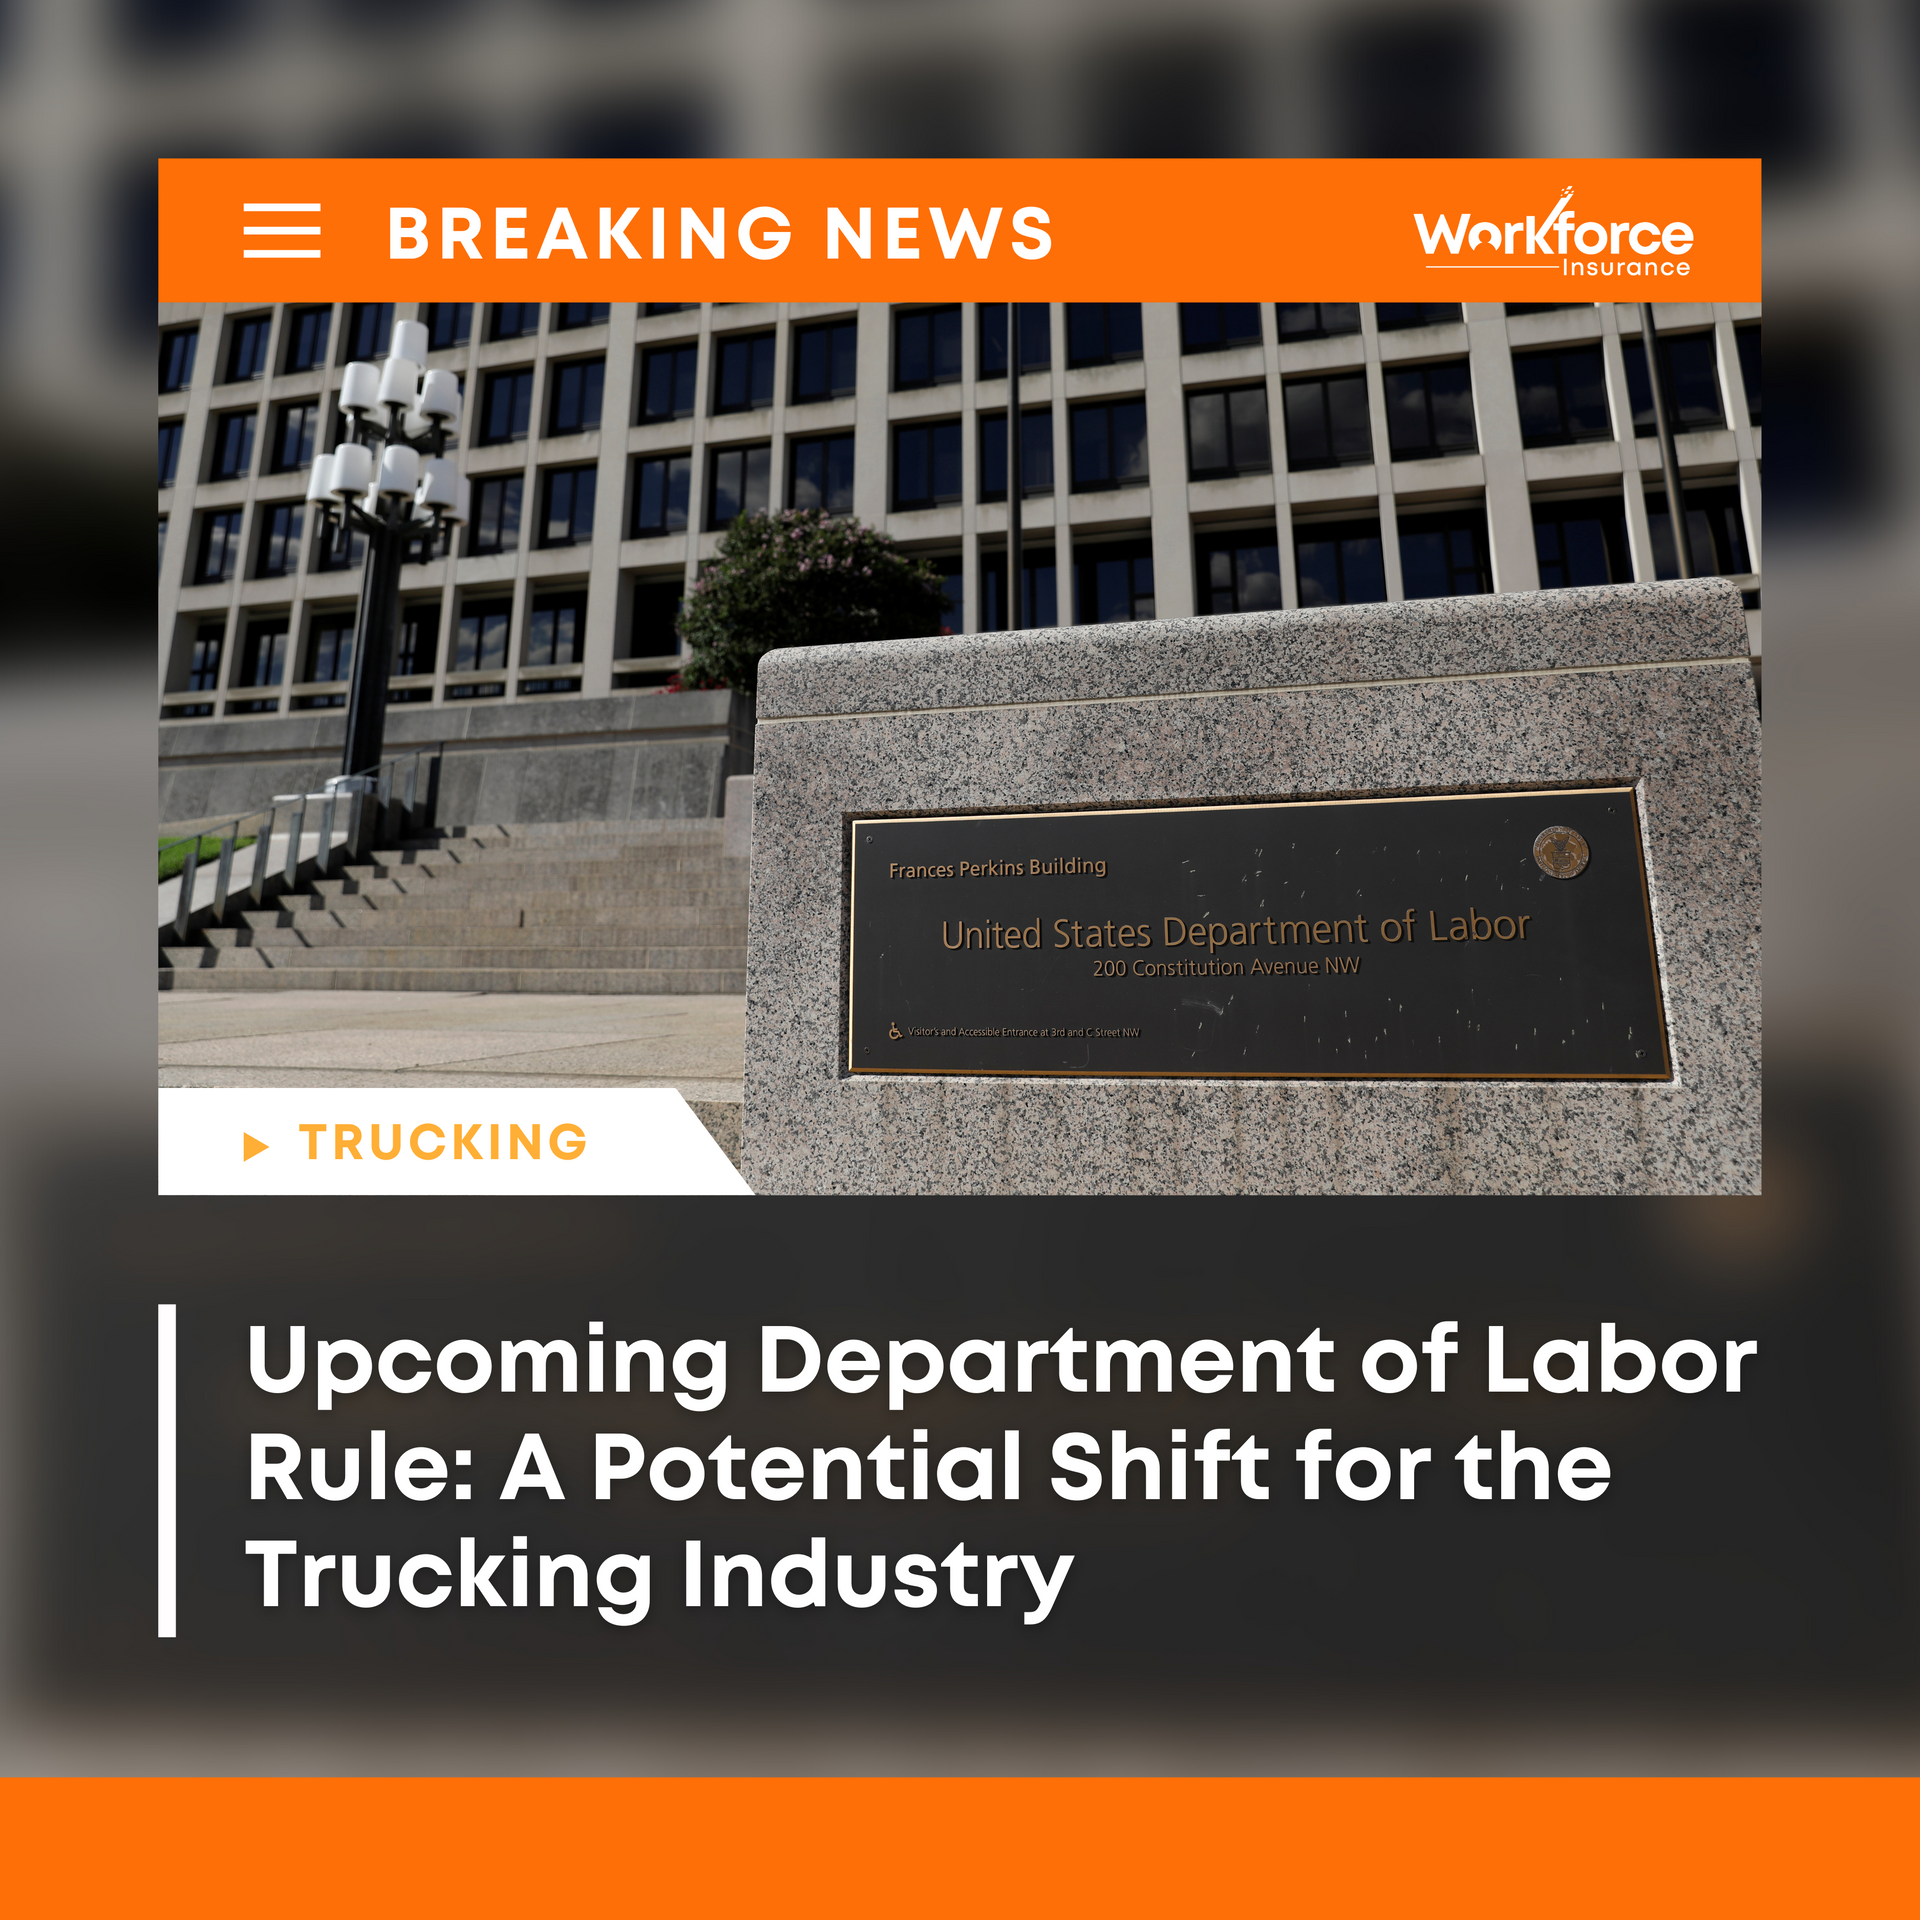 The United States Department of Labor Sign and Building In Washington DC